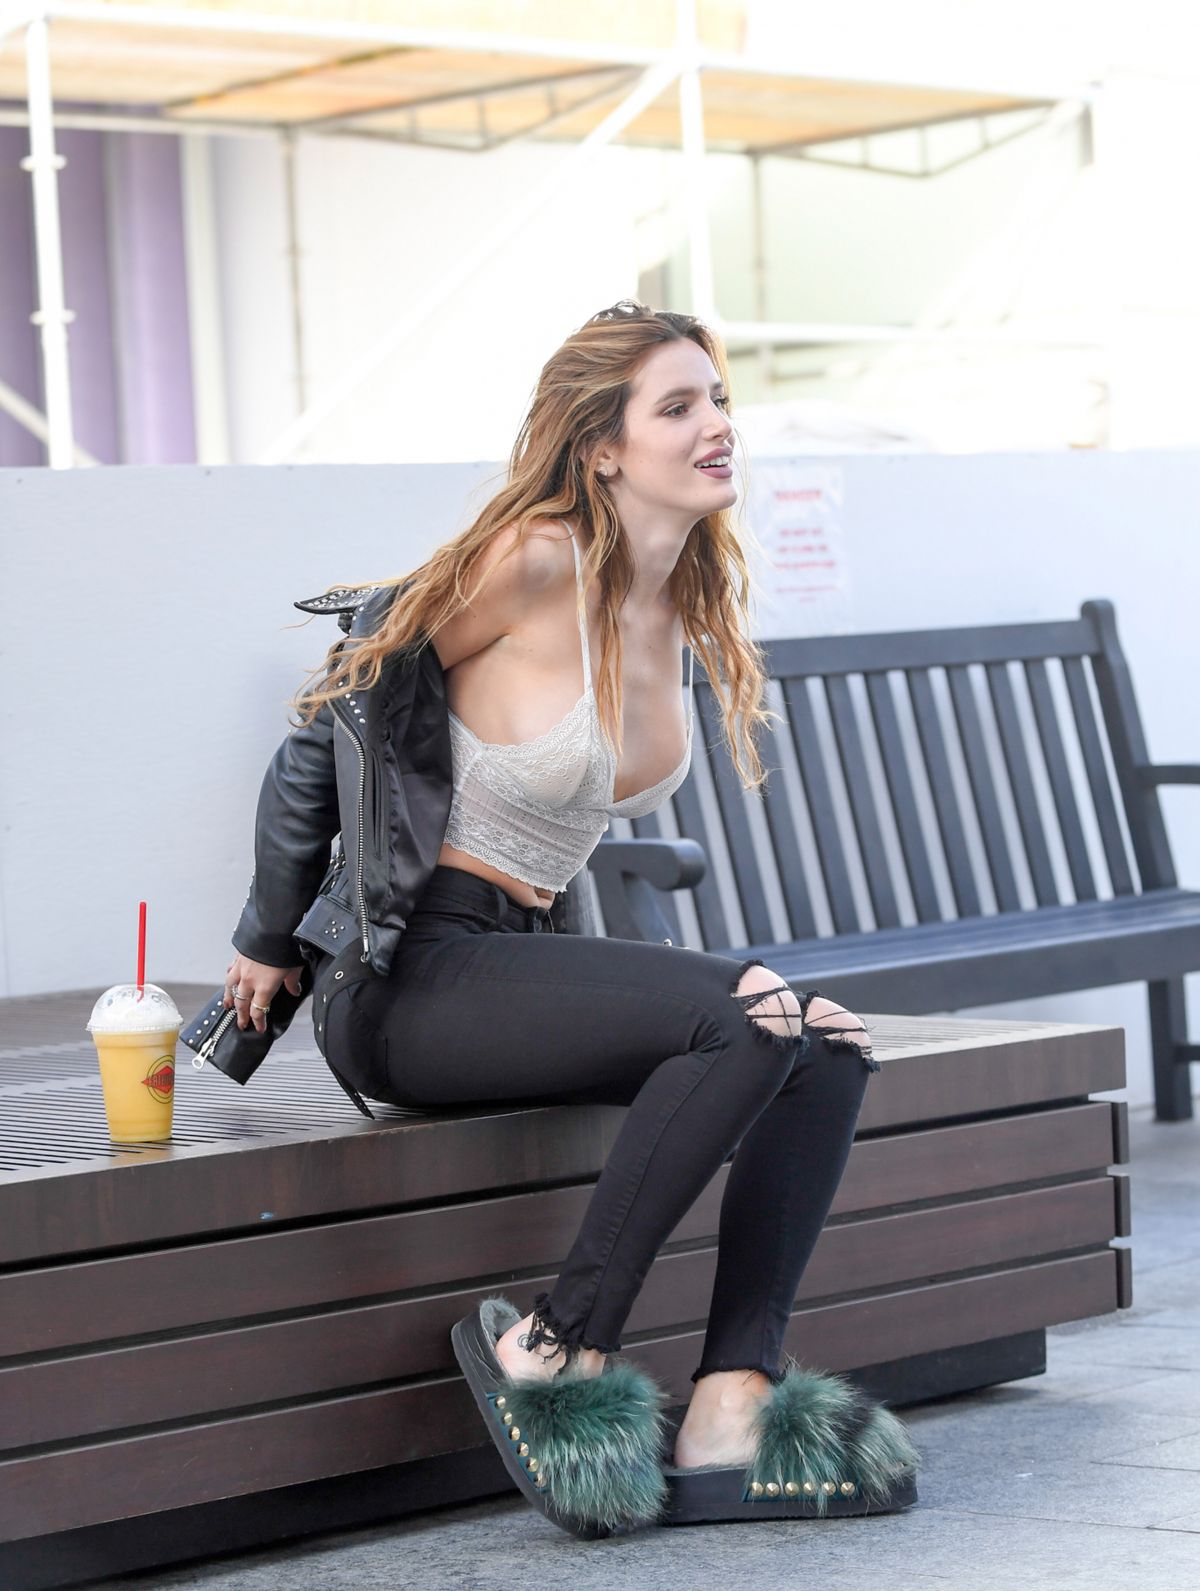 bella-thorne-out-and-about-in-los-angeles-06-14-2016_2.jpg